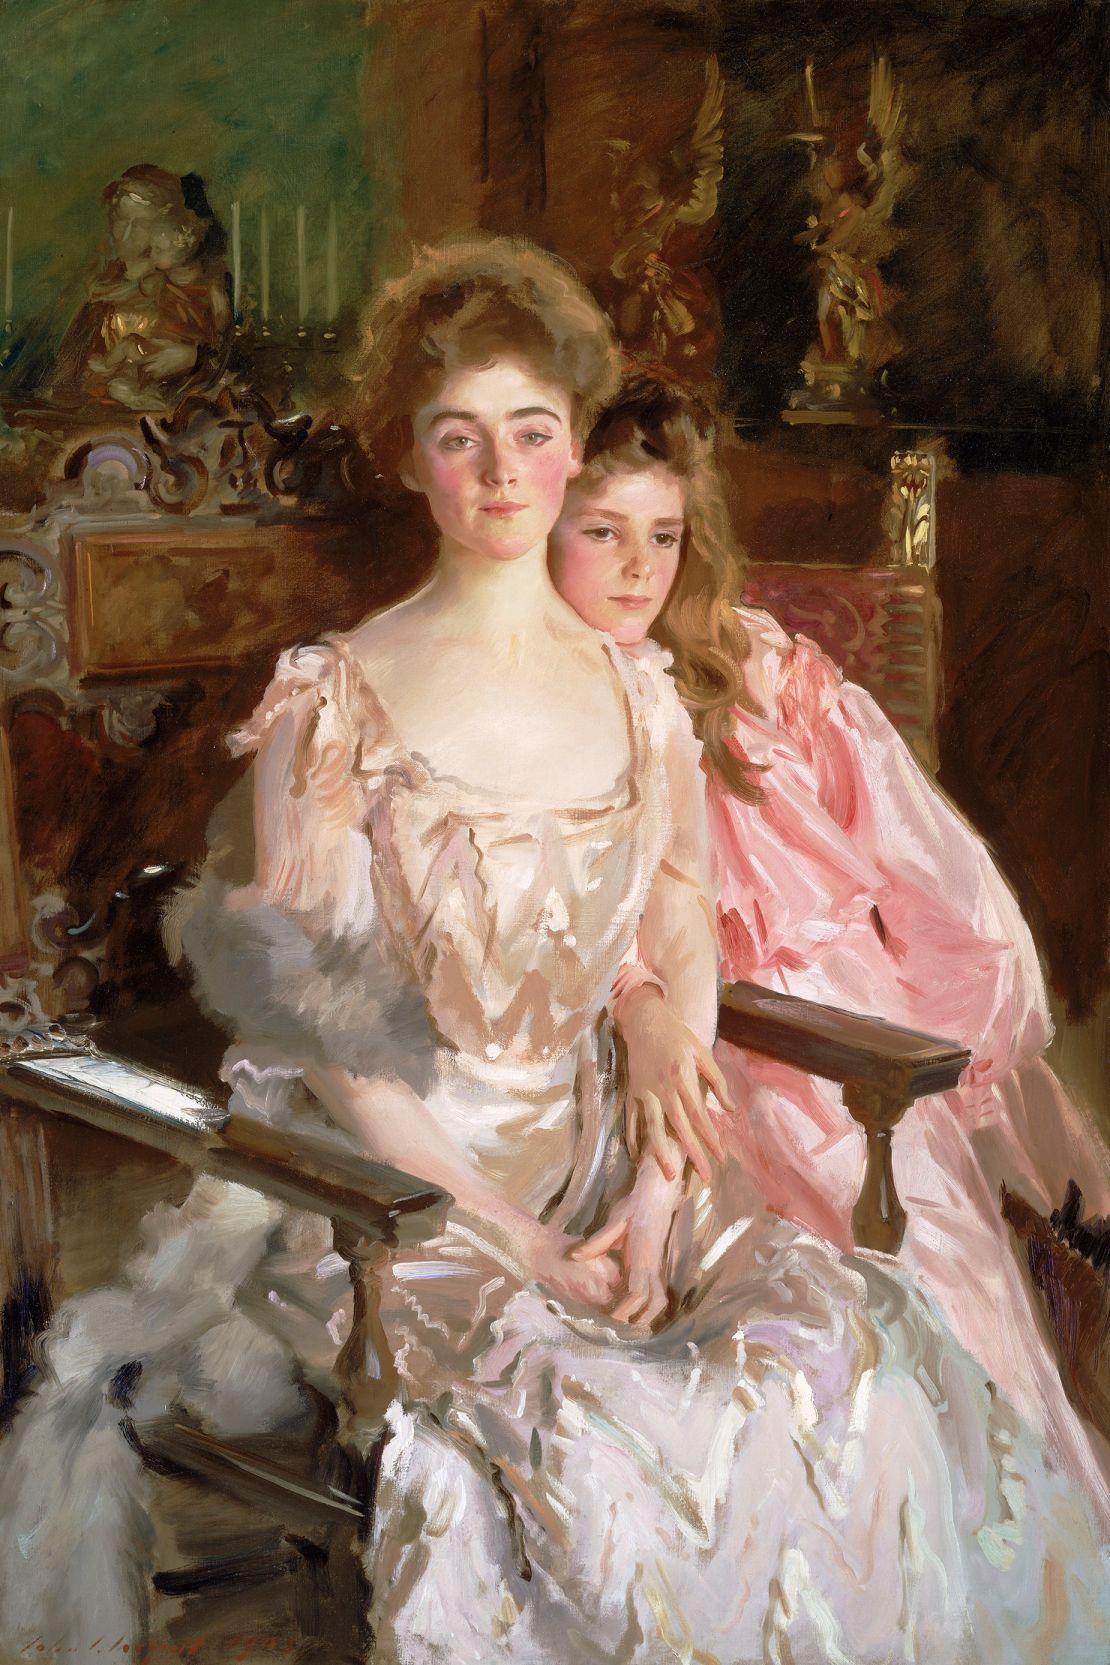 From left to right, Gretchen and her daughter Rachel Warren posed for Sargent in 1903. Rachel was styled in a scrap of pink fabric which Sargent manipulated on canvas to become a dress.